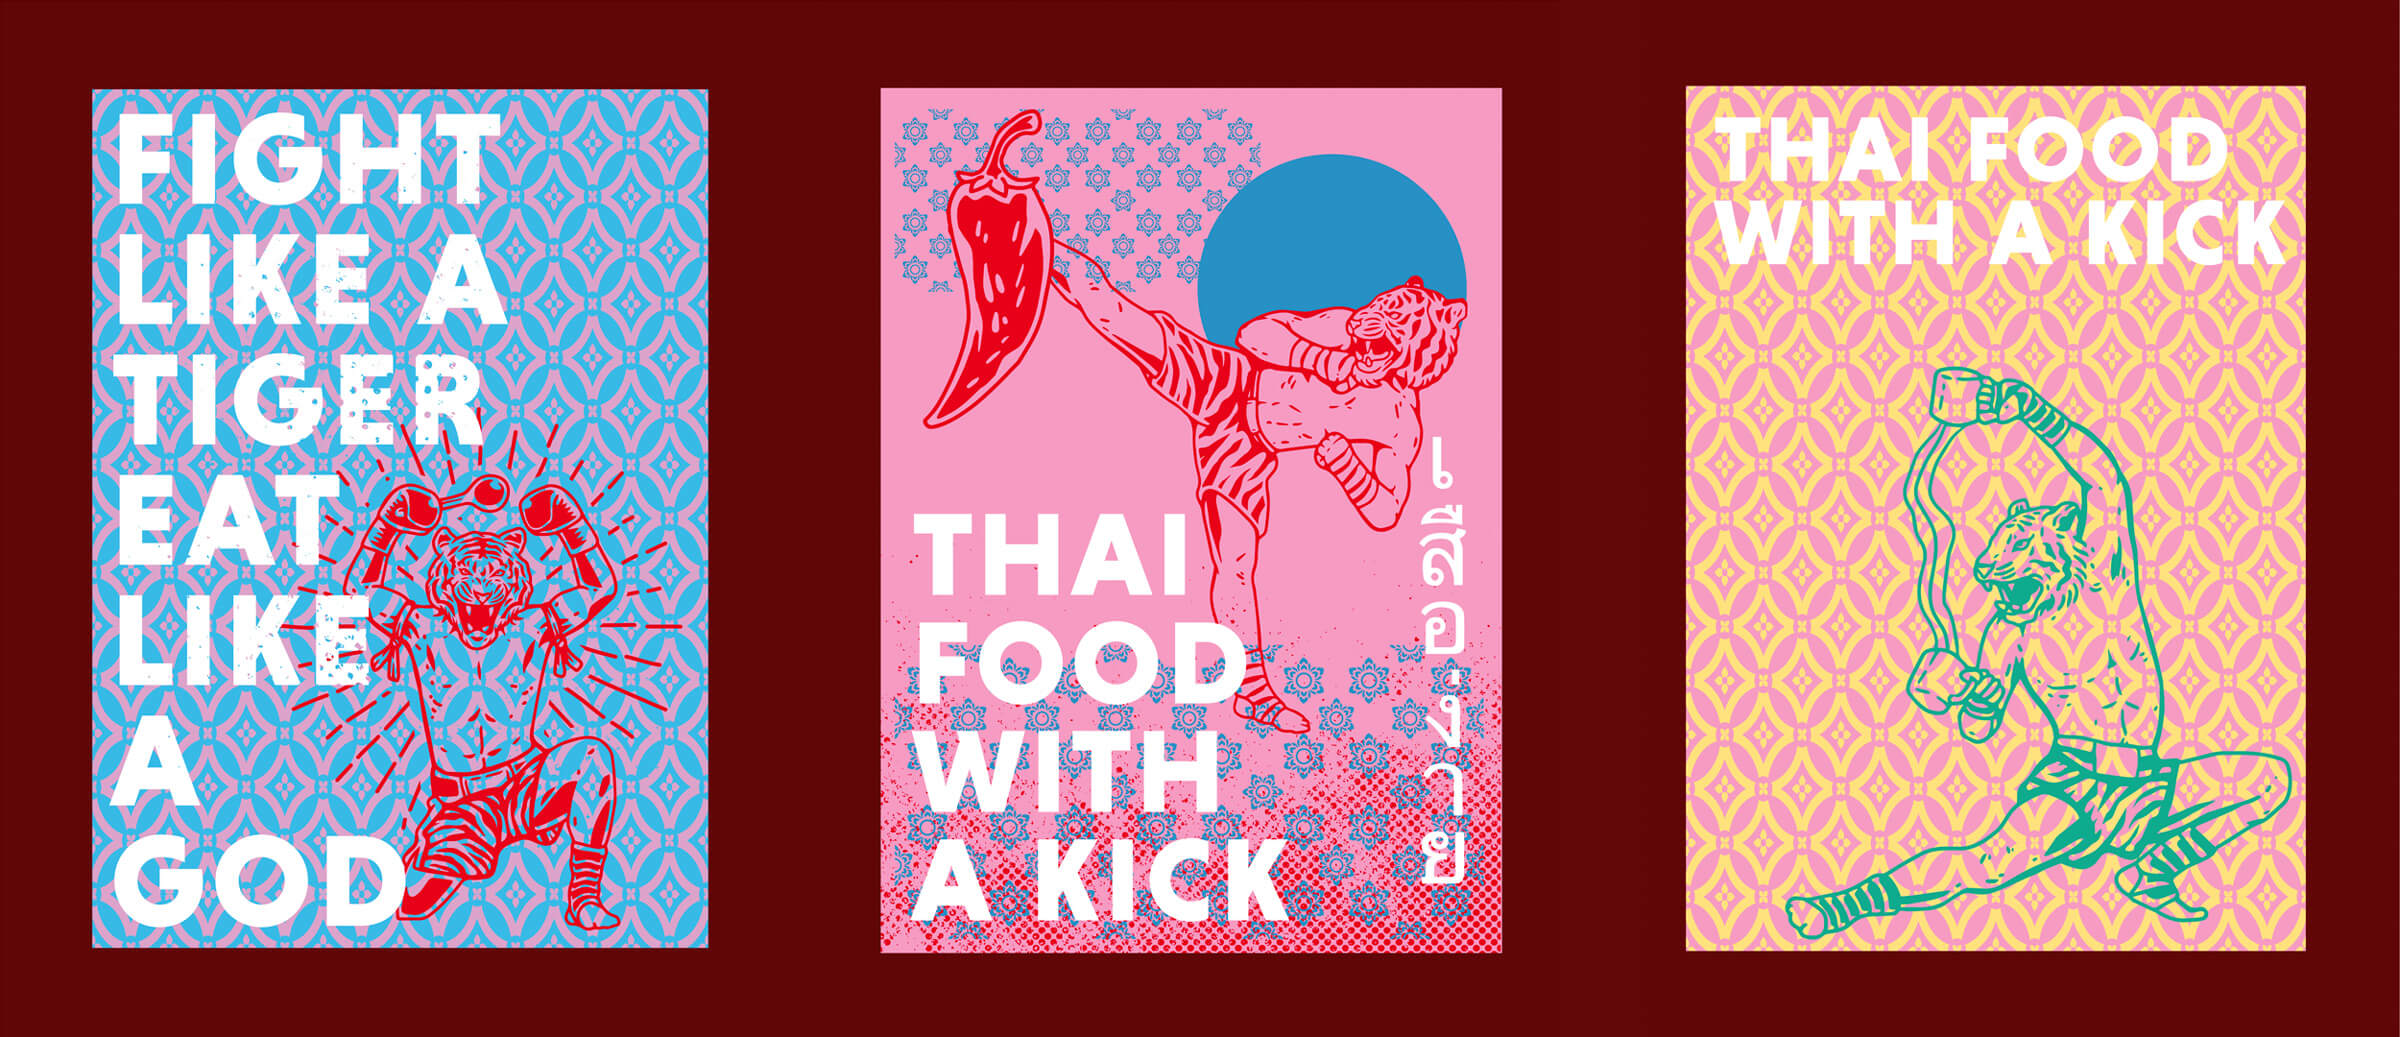 Street poster designs and tiger mascot for Thai food and beverage brand Easy Tiger